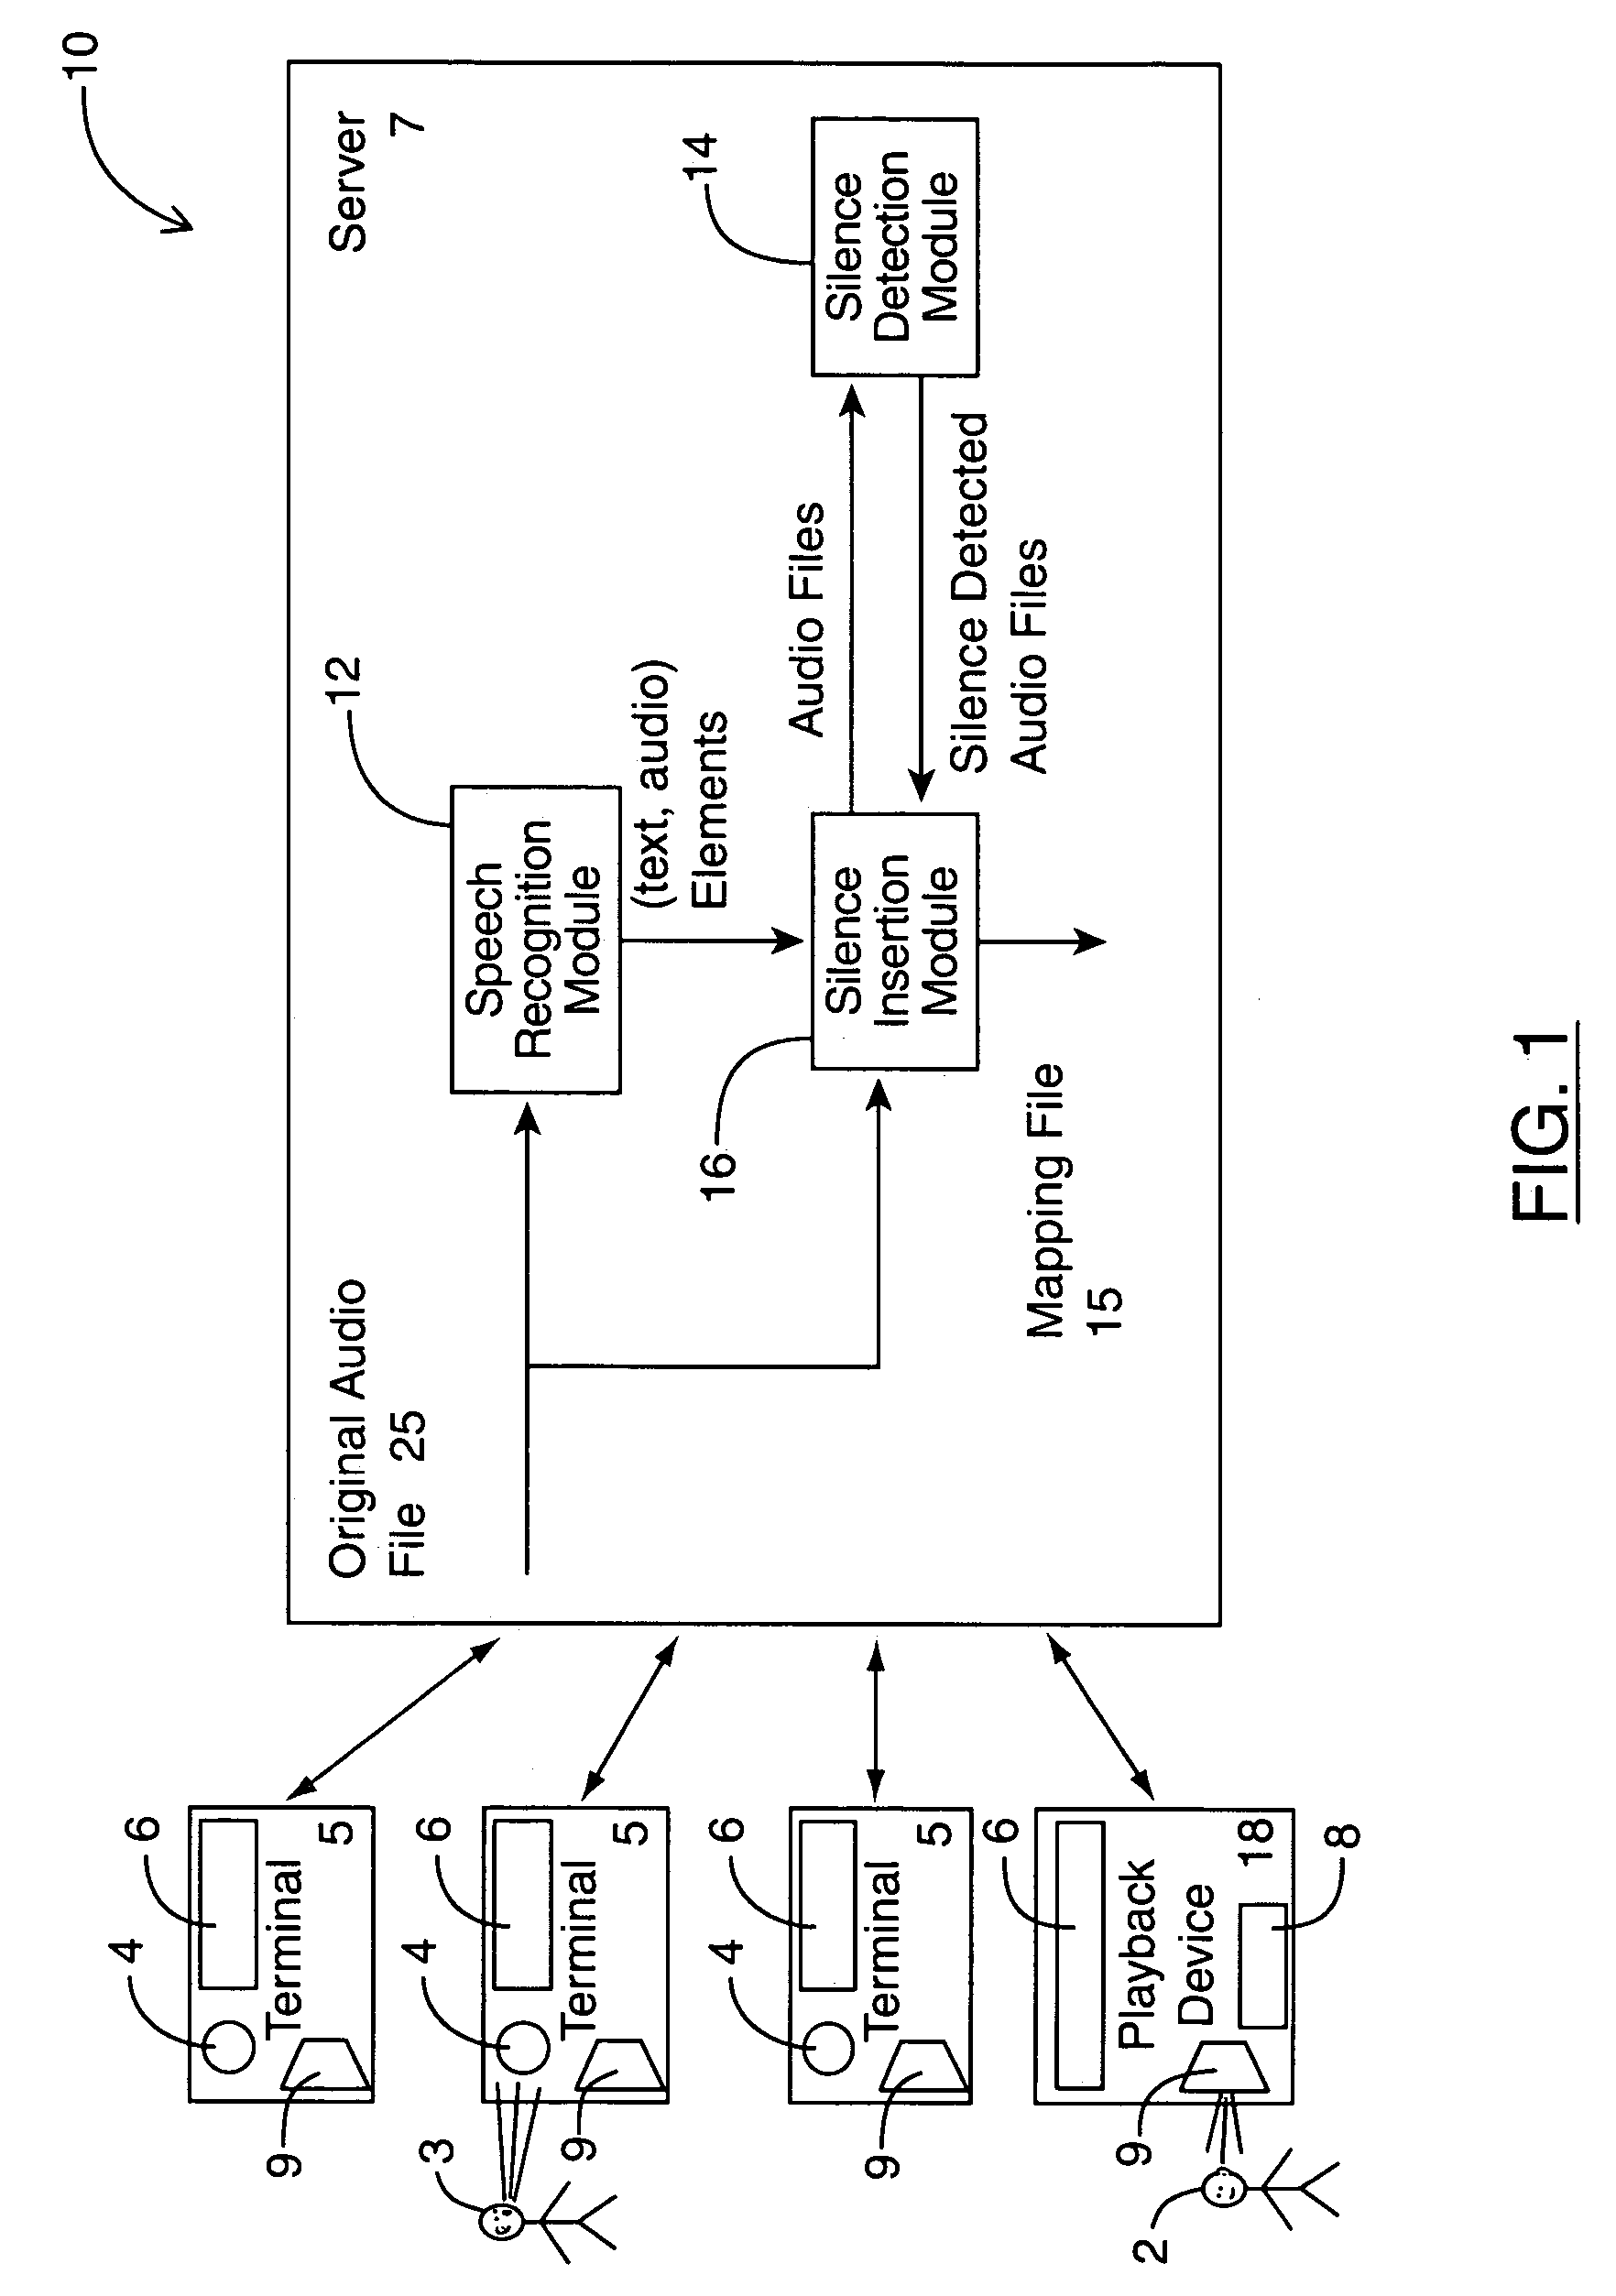 System and method for synchronized text display and audio playback